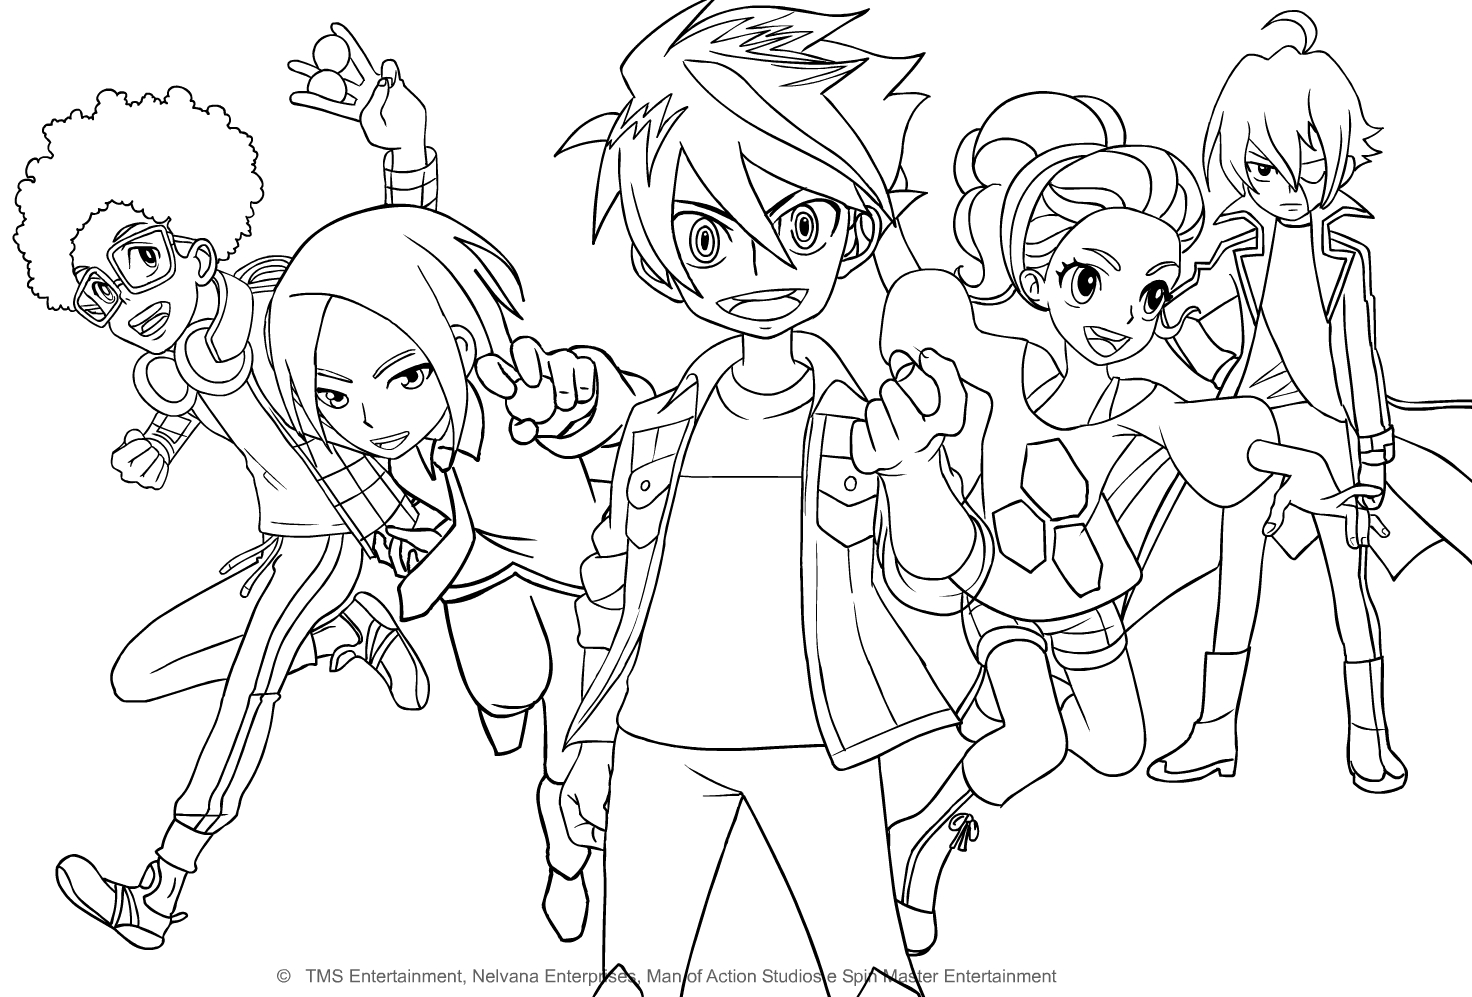 characters from Bakugan Battle Planet coloring pages to print and coloring